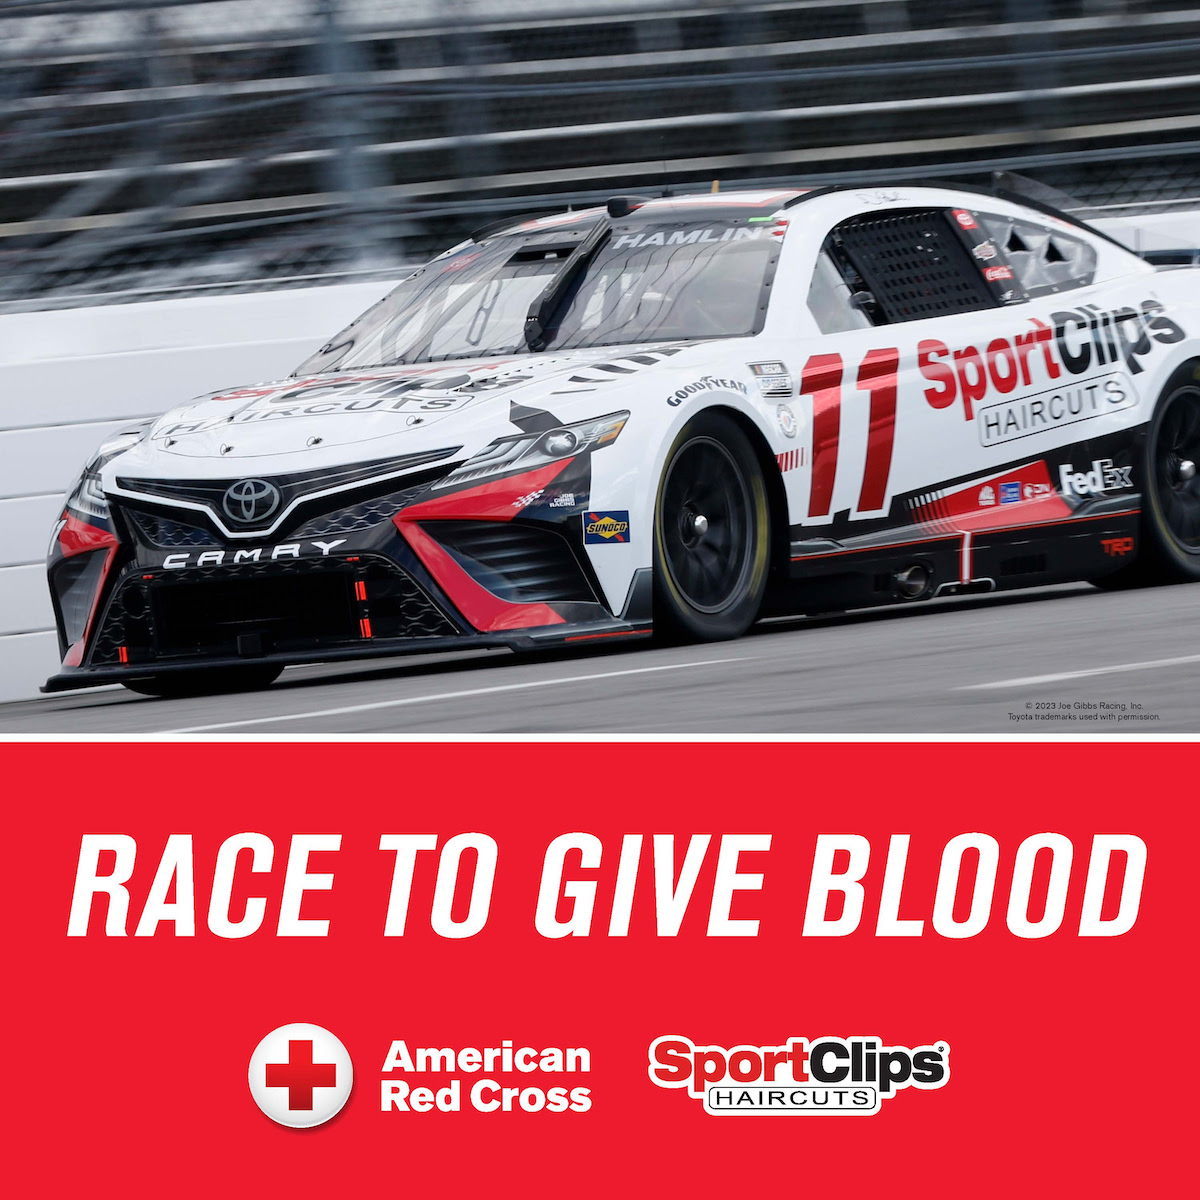 Sports Clips Racecar on the track.